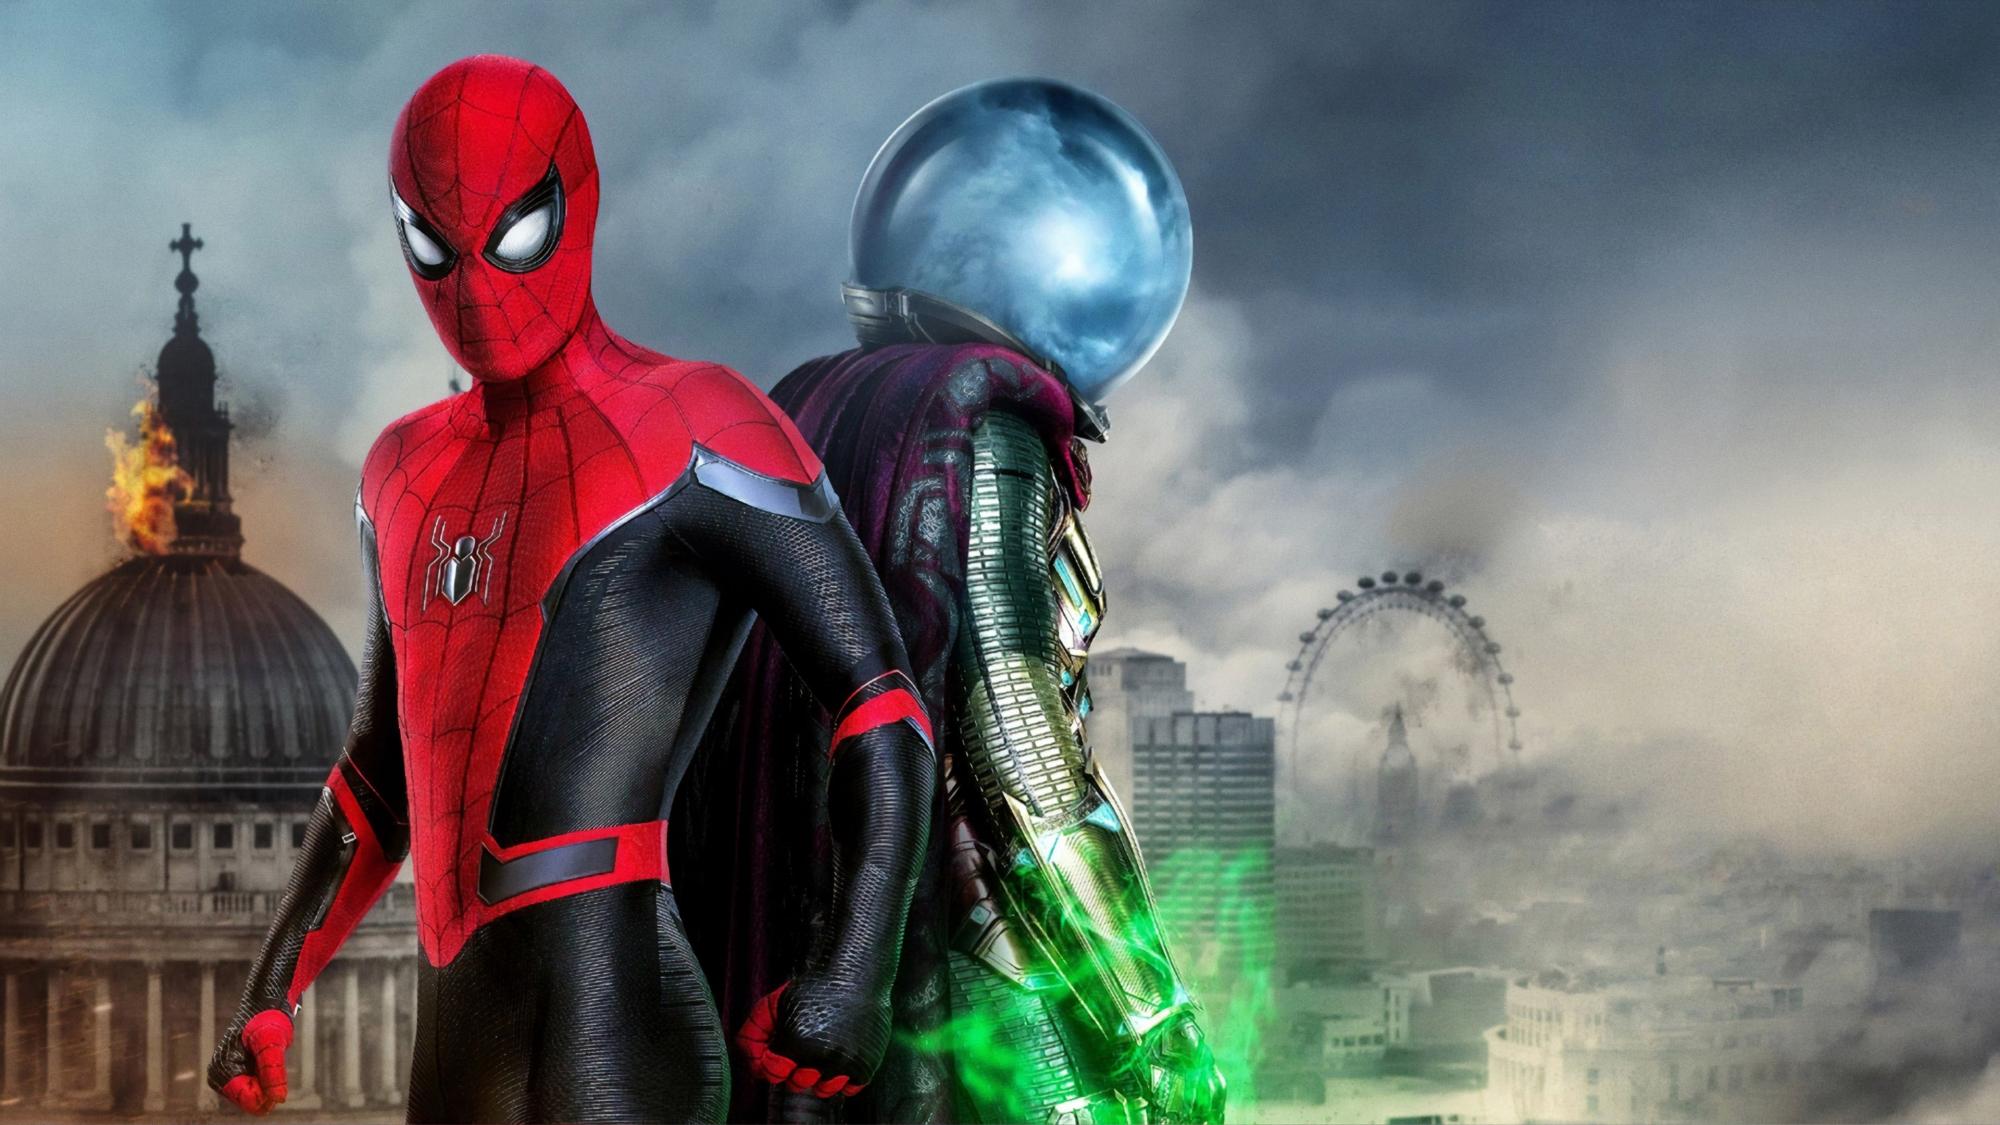 Backdrop Image for Spider-Man: Far from Home